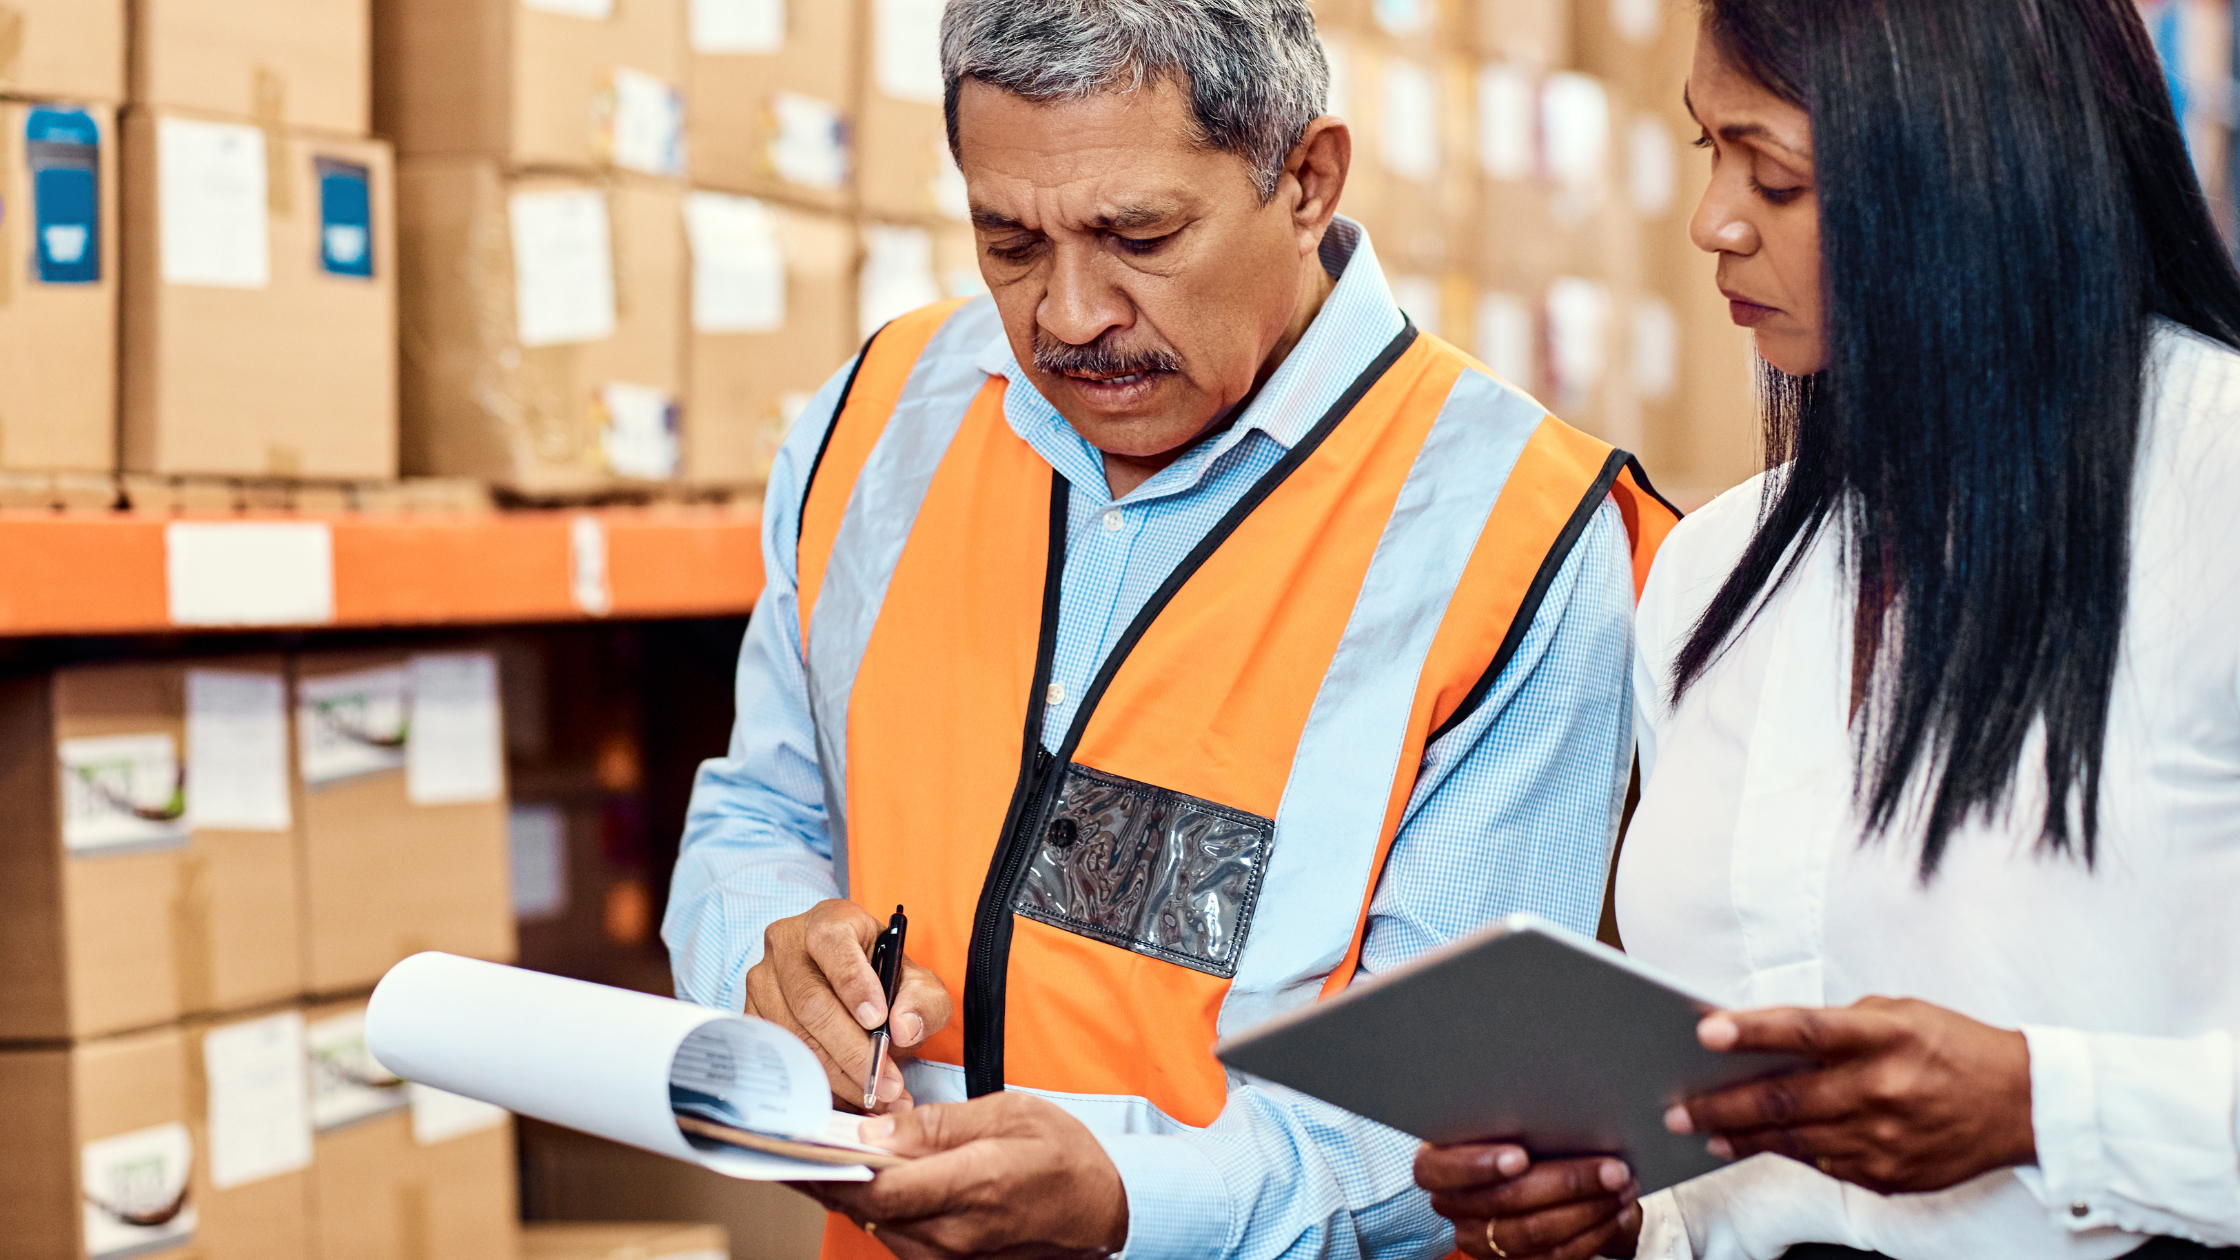 Navigating Supply Chain Issues & Labour Shortages